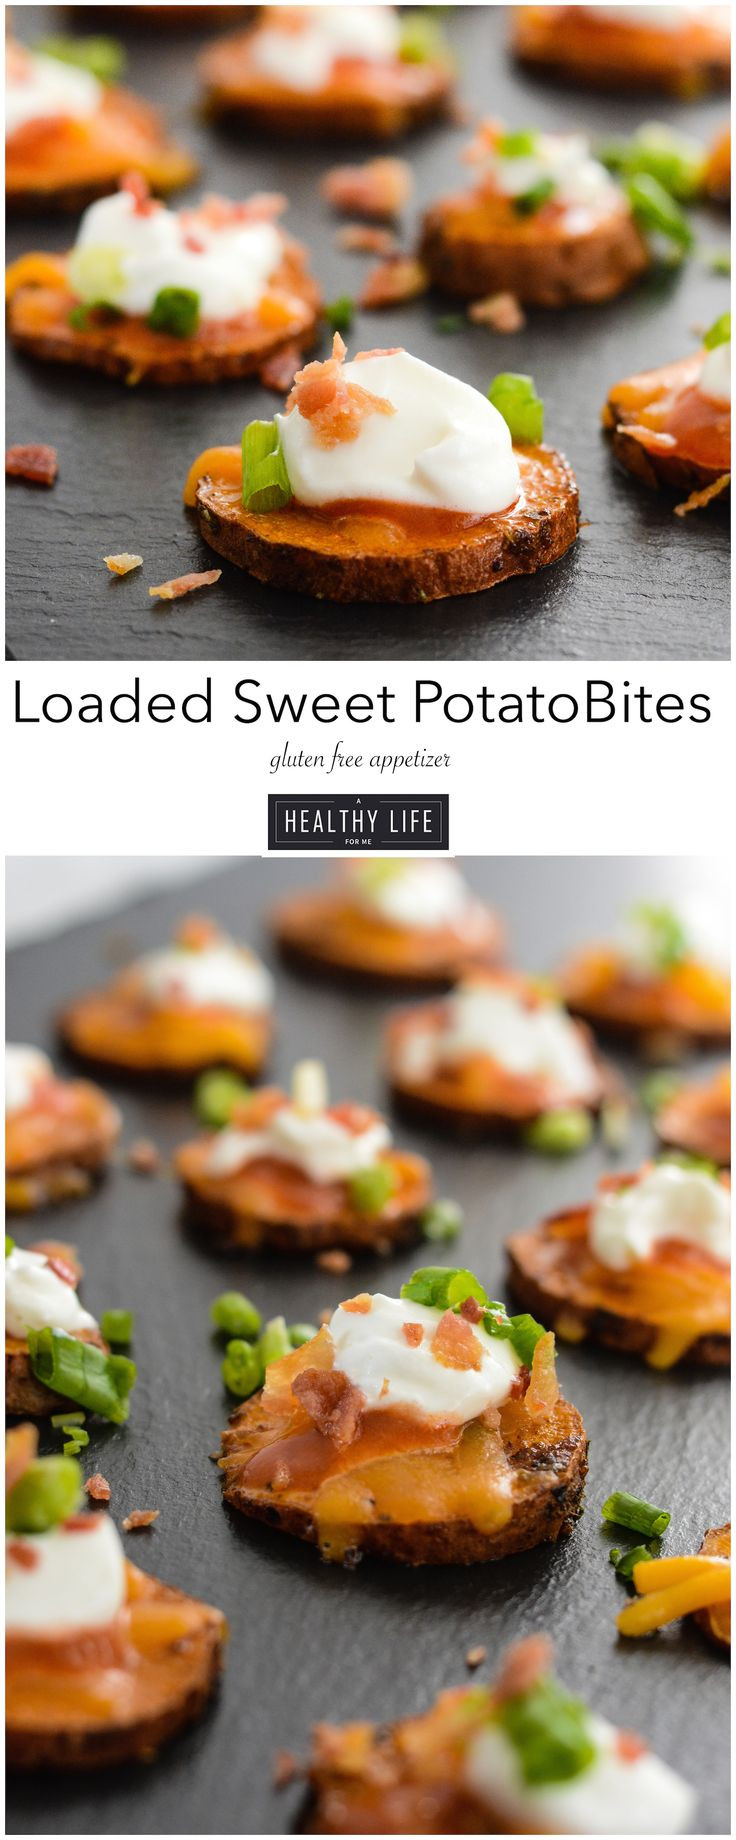 Good Thanksgiving Appetizers
 Best 25 Appetizers for thanksgiving ideas on Pinterest